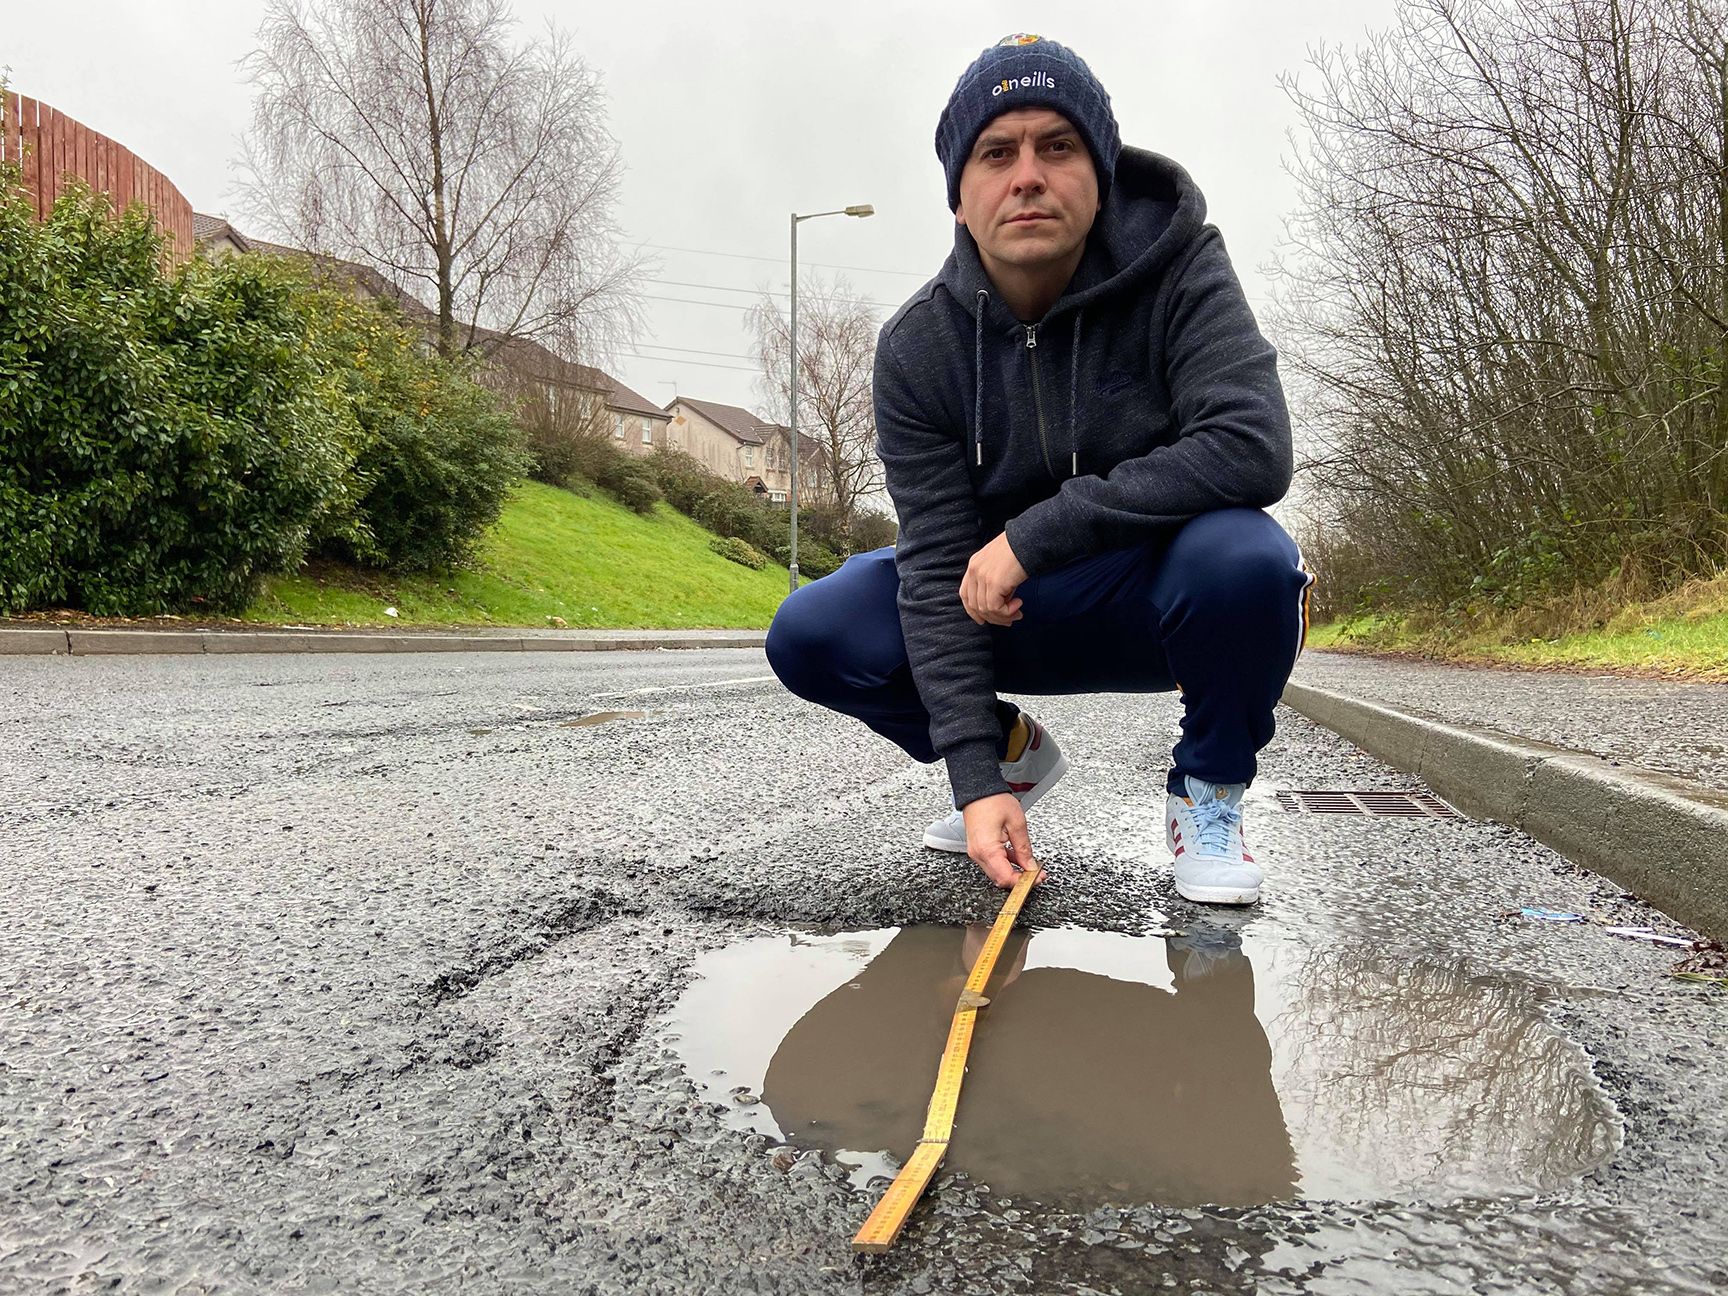 ROAD SAFETY: Sinn Féin councillor Danny Baker at one of the many potholes in Lagmore. A car hit a pothole at the weekend causing an accident